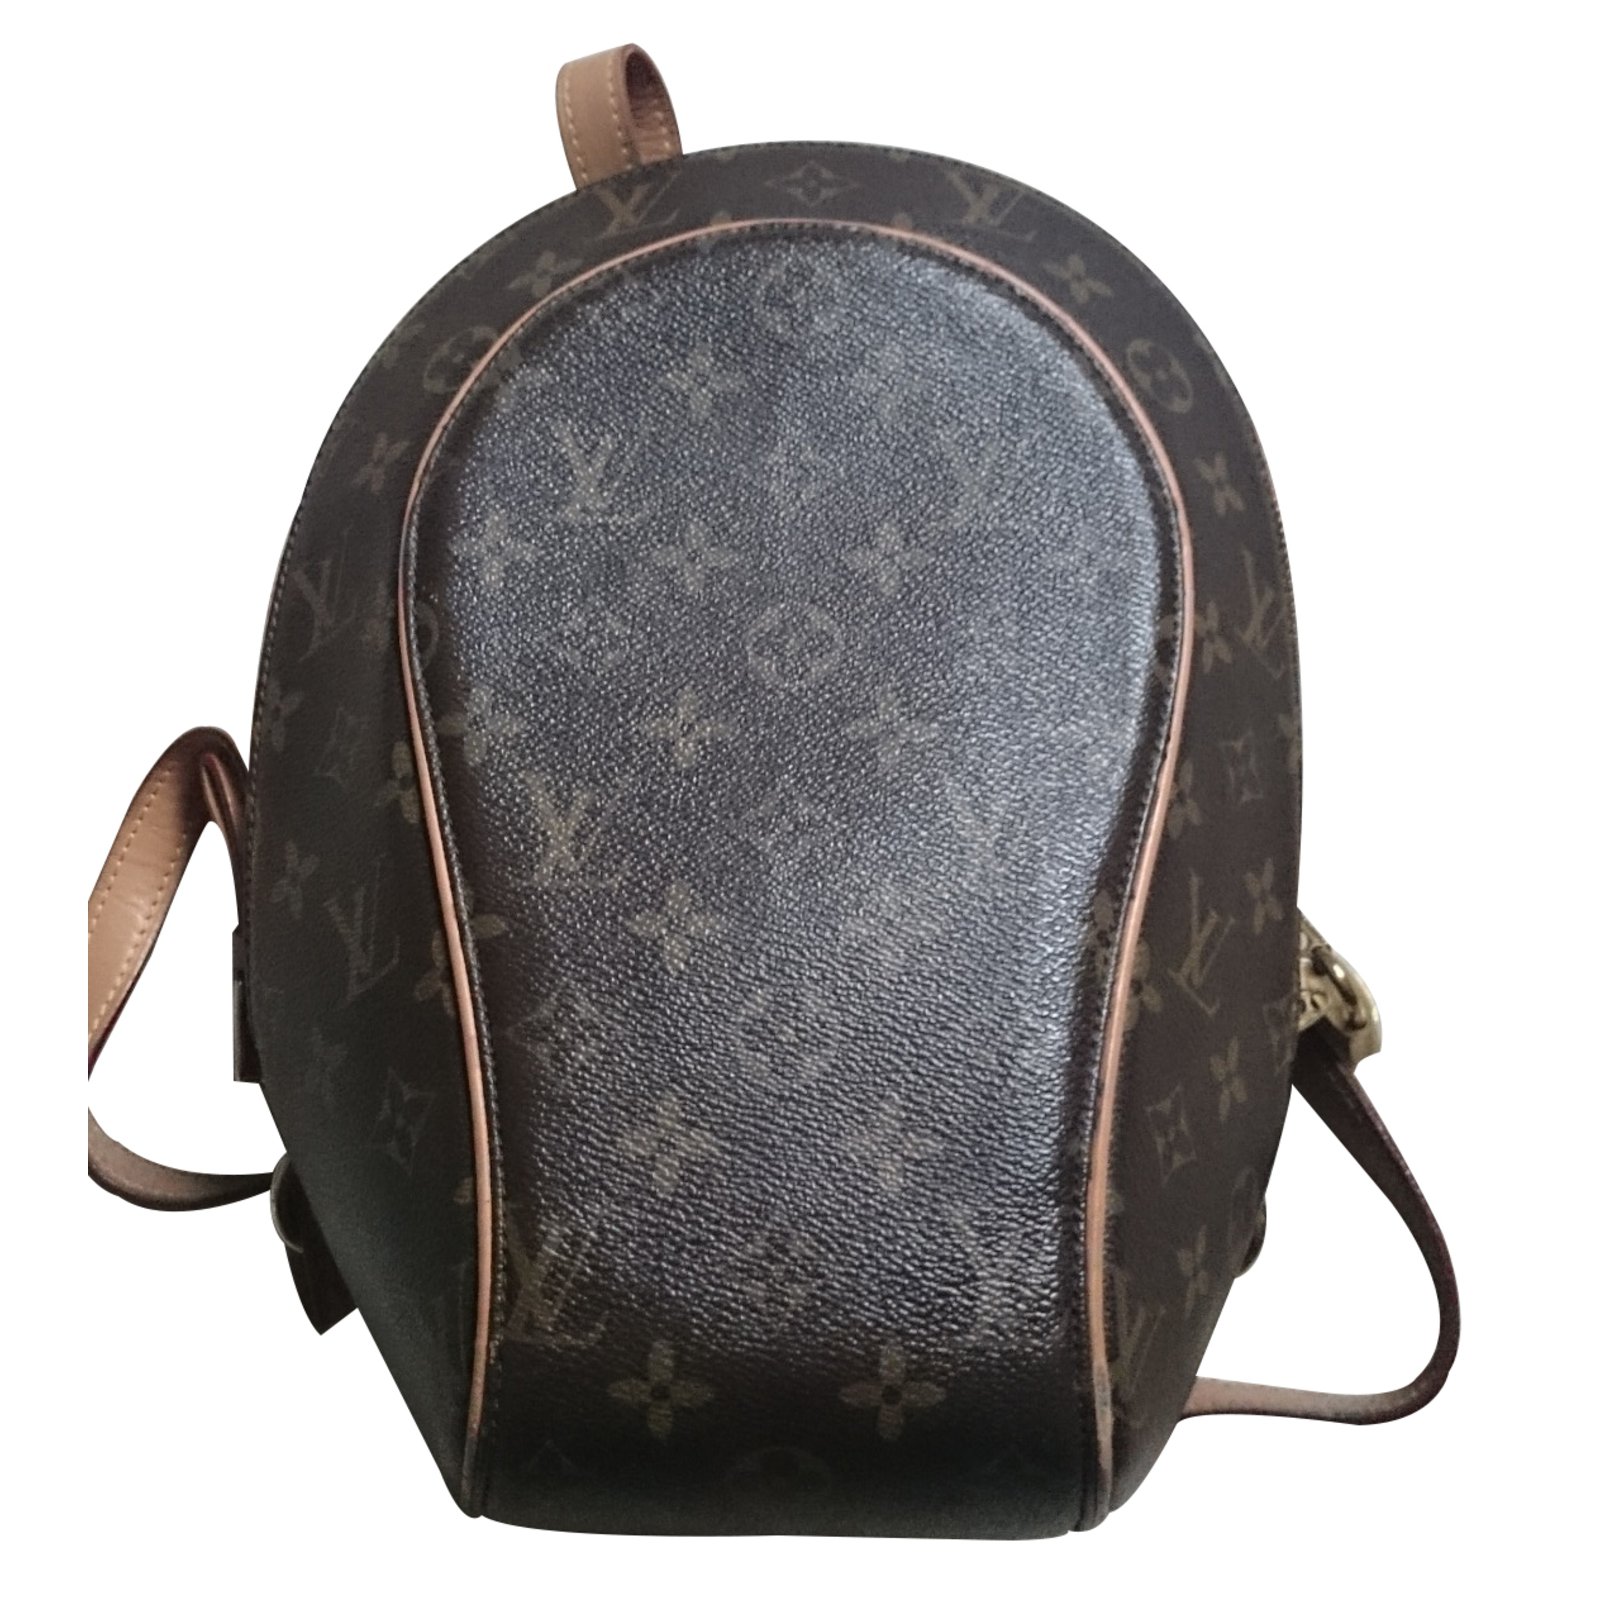 Sac A Dos Louis Vuitton Homme | Confederated Tribes of the Umatilla Indian Reservation